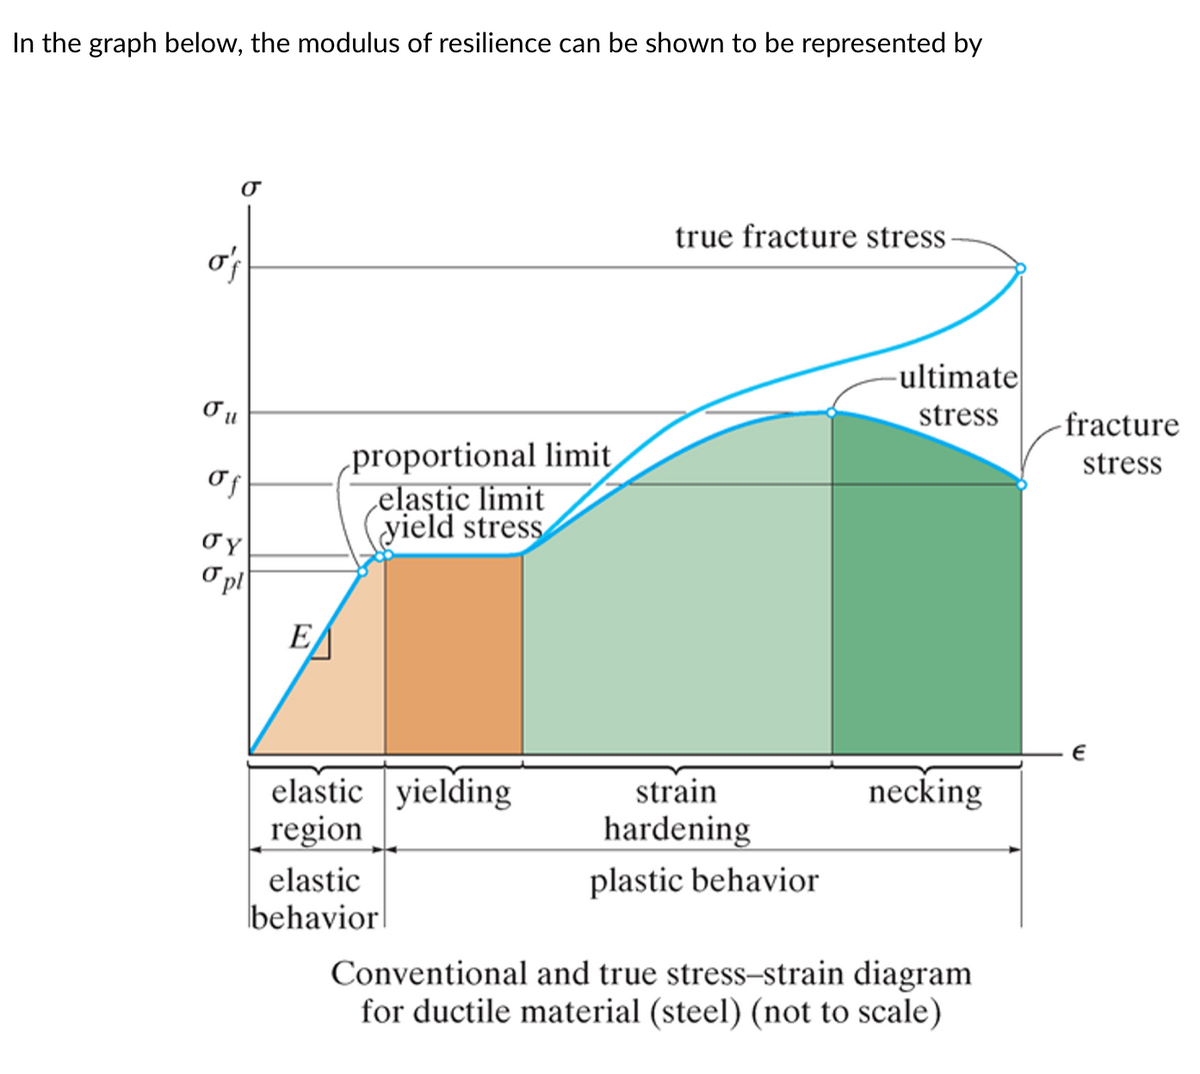 ### Stress-Strain Diagram for Ductile Material (Steel)

The graph below is a conventional and true stress-strain diagram for a ductile material, specifically steel. The diagram is not to scale. 

#### Key Components of the Diagram:

1. **Stress (σ)**: Represented on the vertical (y-axis) of the graph. Various points along this axis are:
   - **σ_f**: True fracture stress
   - **σ_u**: Ultimate stress
   - **σ_f**: Fracture stress
   - **σ_Y**: Yield stress
   - **σ_pl**: Proportional limit
   - **E**: Elastic modulus

2. **Strain (ε)**: Represented on the horizontal (x-axis) of the graph. 

3. **Elastic Region**: The initial portion of the graph where the material exhibits elastic behavior. Within this region, stress and strain are proportional, and the material returns to its original shape when the load is removed.

4. **Proportional Limit (σ_pl)**: The point up to which Hooke's Law is obeyed, and the material exhibits perfectly elastic behavior.

5. **Elastic Limit / Yield Stress (σ_Y)**: The maximum stress that the material can withstand while being able to return to its original shape upon removal of the load.

6. **Yielding Region**: The area following the proportional limit where the material transitions from elastic behavior to plastic behavior. In this phase, permanent deformation starts to occur.

7. **Strain Hardening Region**: As the material is deformed further, it undergoes strain hardening. This increases the material's strength and is evidenced by a rise in the stress-strain curve after yielding.

8. **Necking and Ultimate Stress (σ_u)**: The peak value on the stress-strain curve indicates the ultimate stress. Beyond this point, necking occurs, which is a localized reduction in cross-sectional area of the specimen.

9. **Fracture Stress and True Fracture Stress (σ_f)**: The stress at which the material ultimately fails or fractures.

10. **Plastic Behavior**: The region beyond the yielding point where permanent deformation occurs. This includes strain hardening and necking.

11. **Modulus of Resilience (E)**: Represented as the area under the elastic portion of the stress-strain curve. It quantifies the energy absorbed by the material